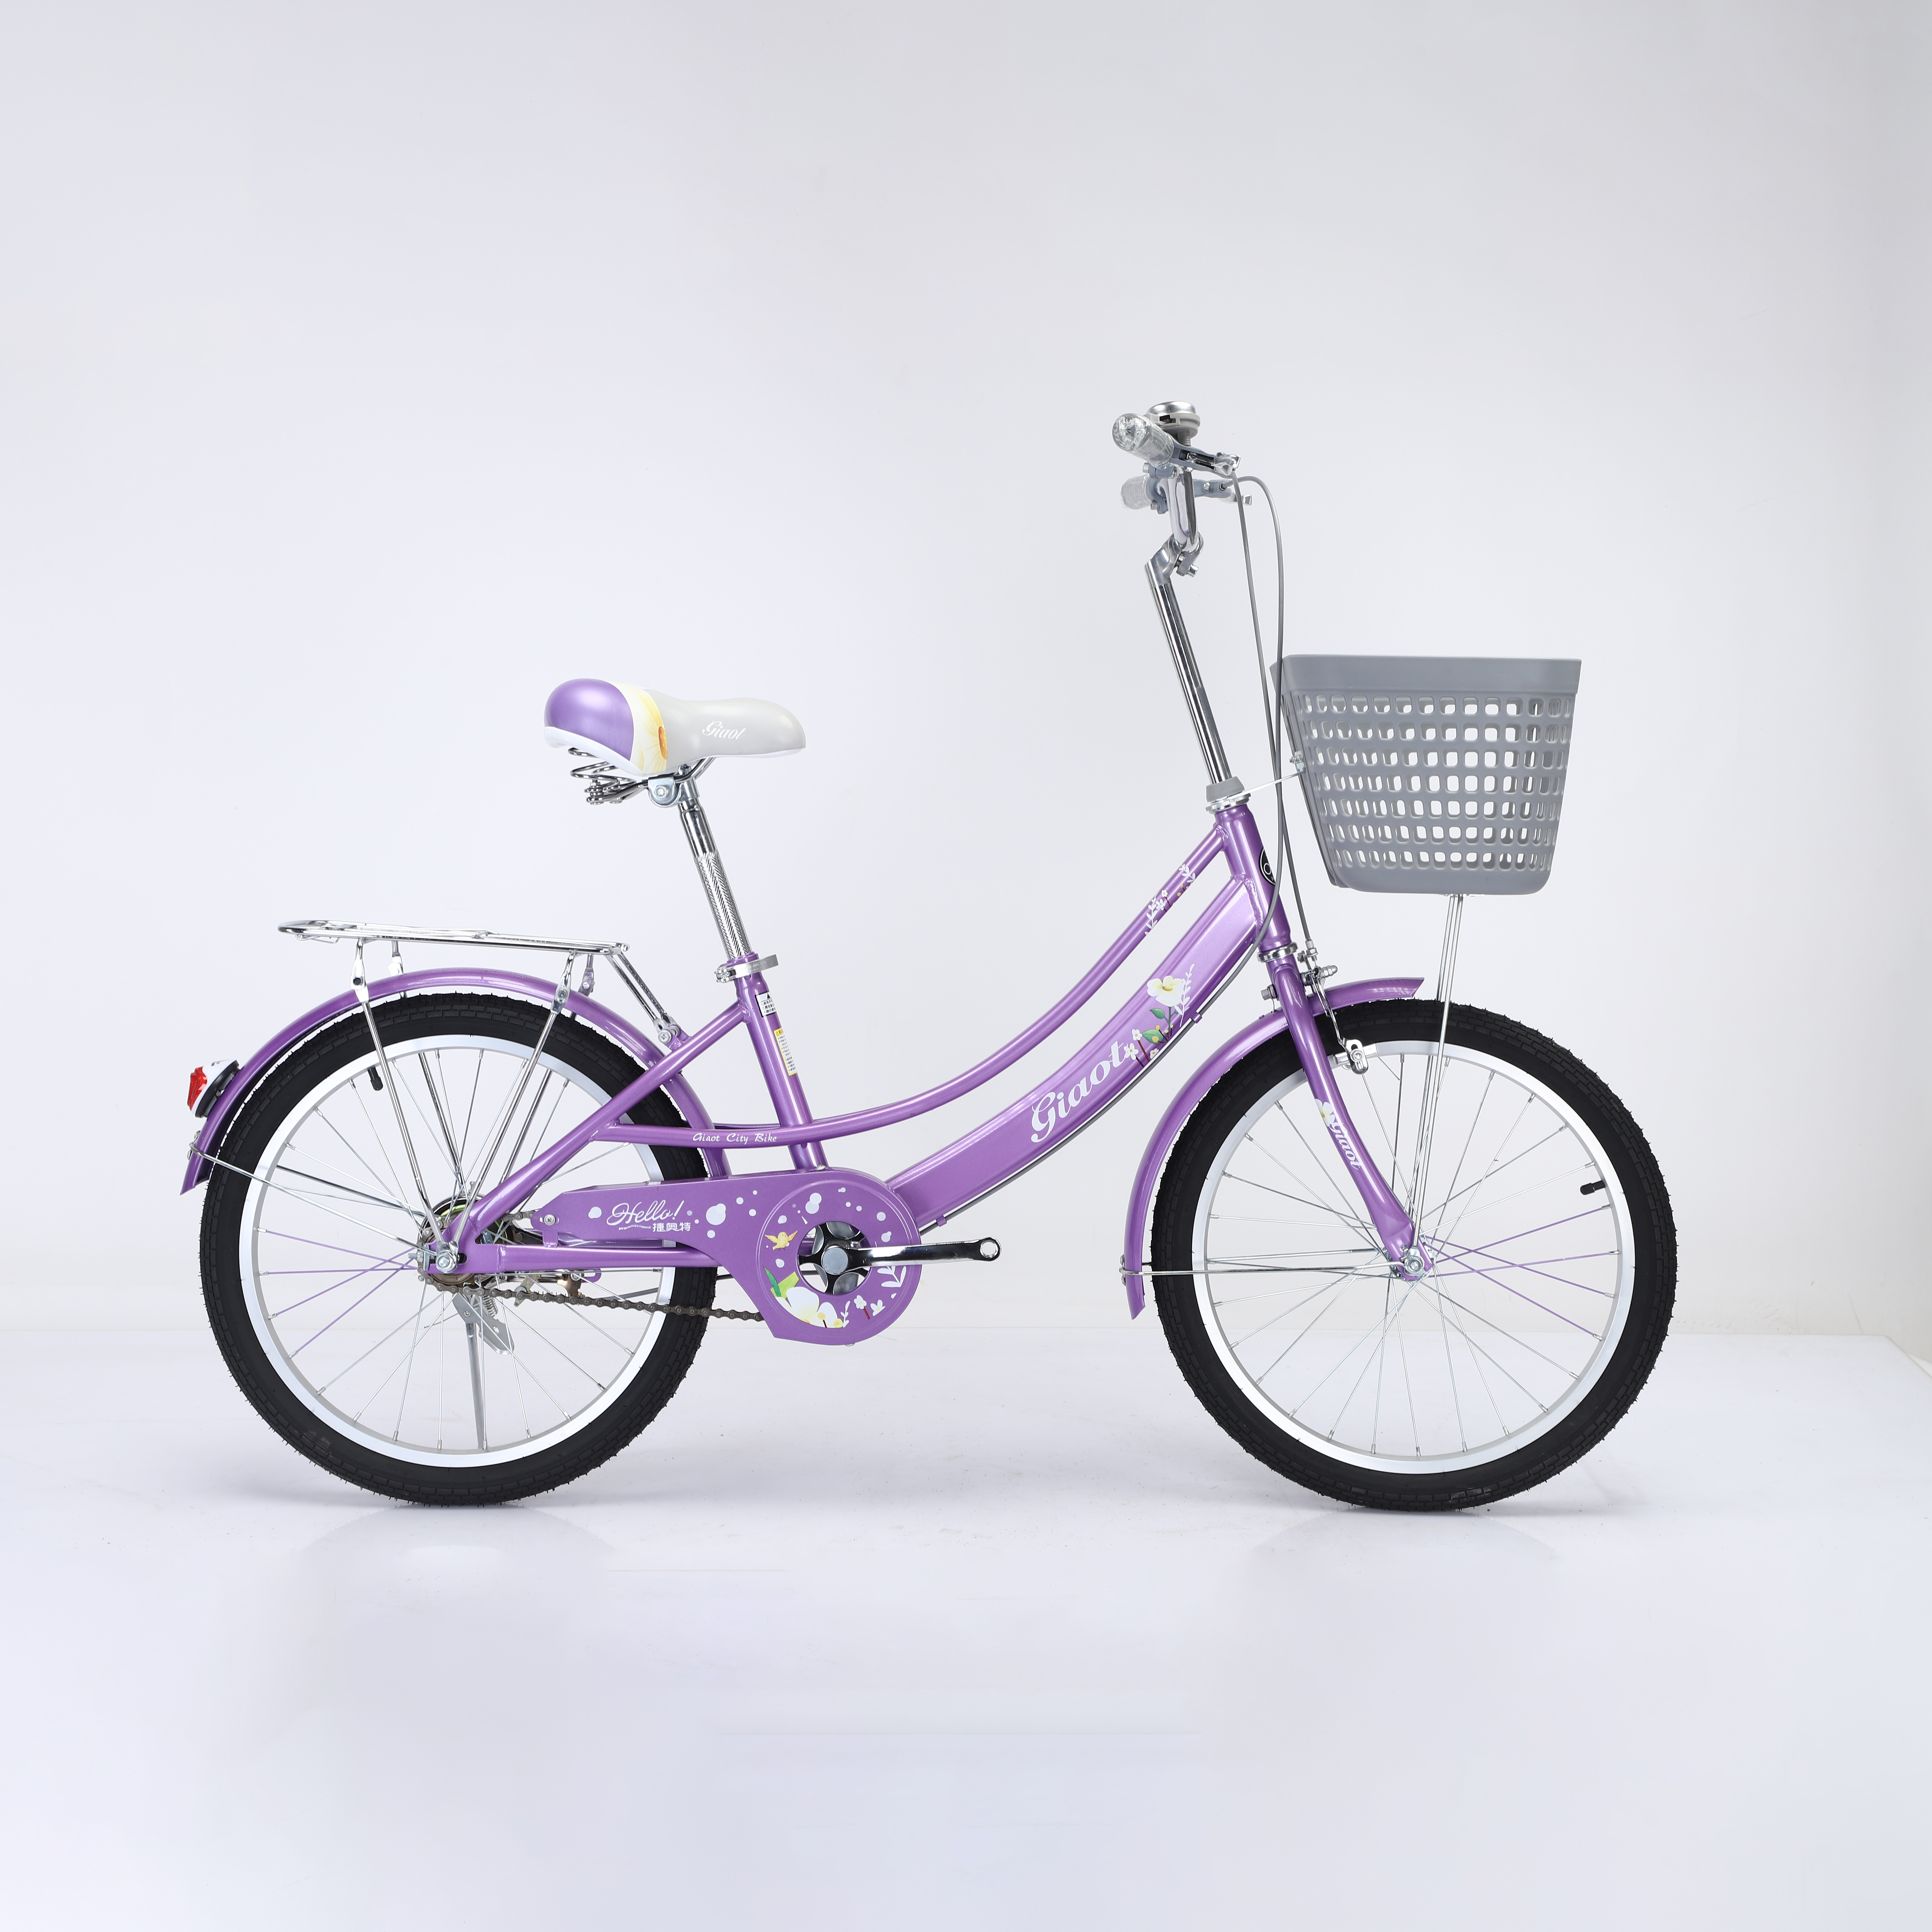 With thick wear-resistant tires, our Giaot Kids Bike offers excellent traction and stability.